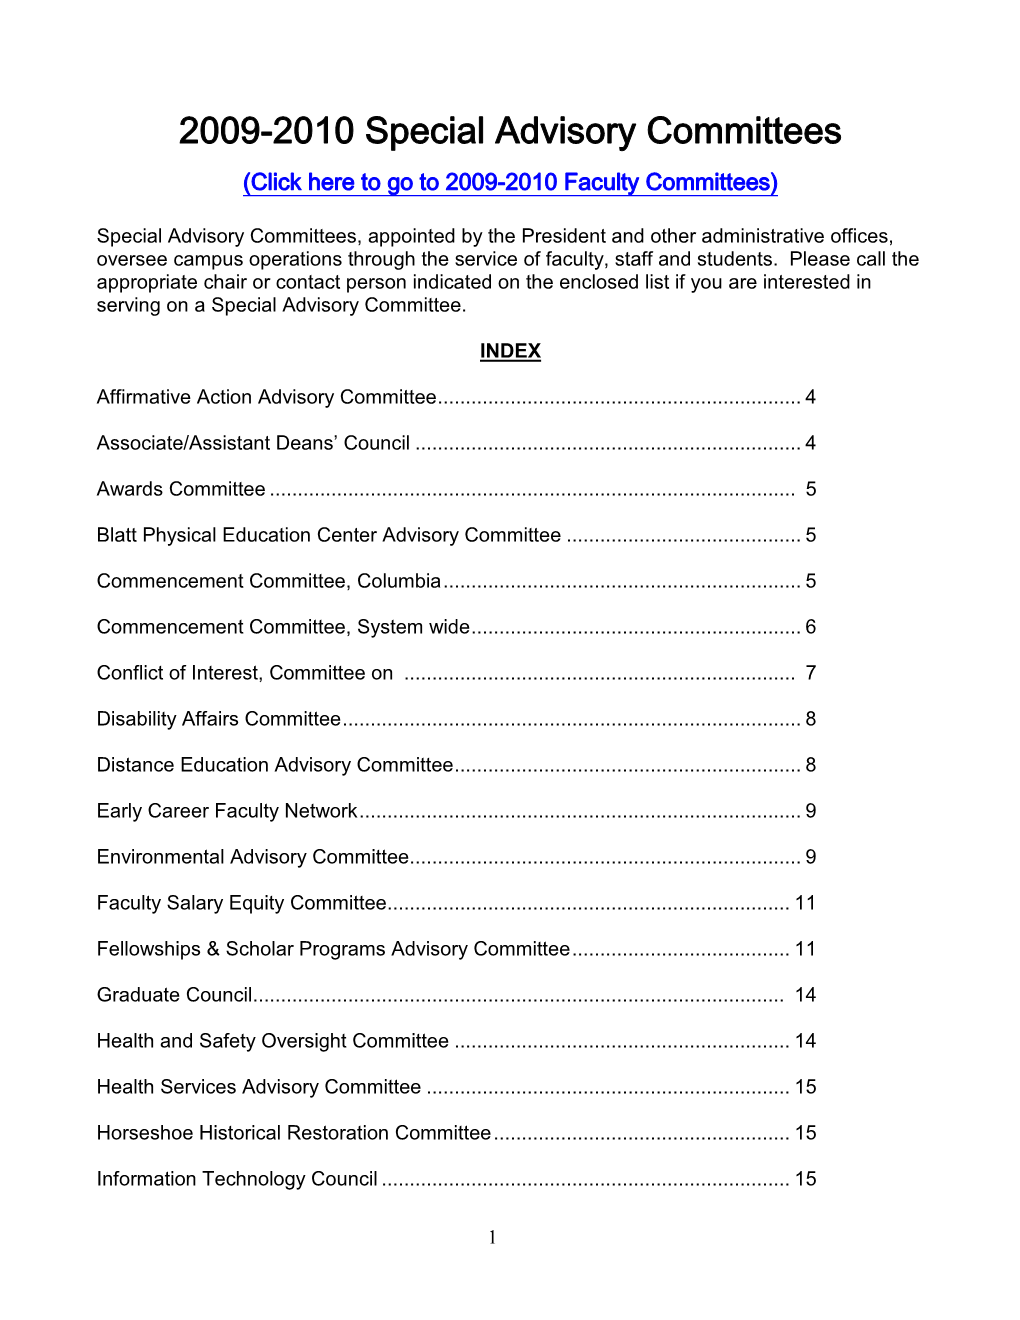 2009-2010 Special Advisory Committees (Click Here to Go to 2009-2010 Faculty Committees)